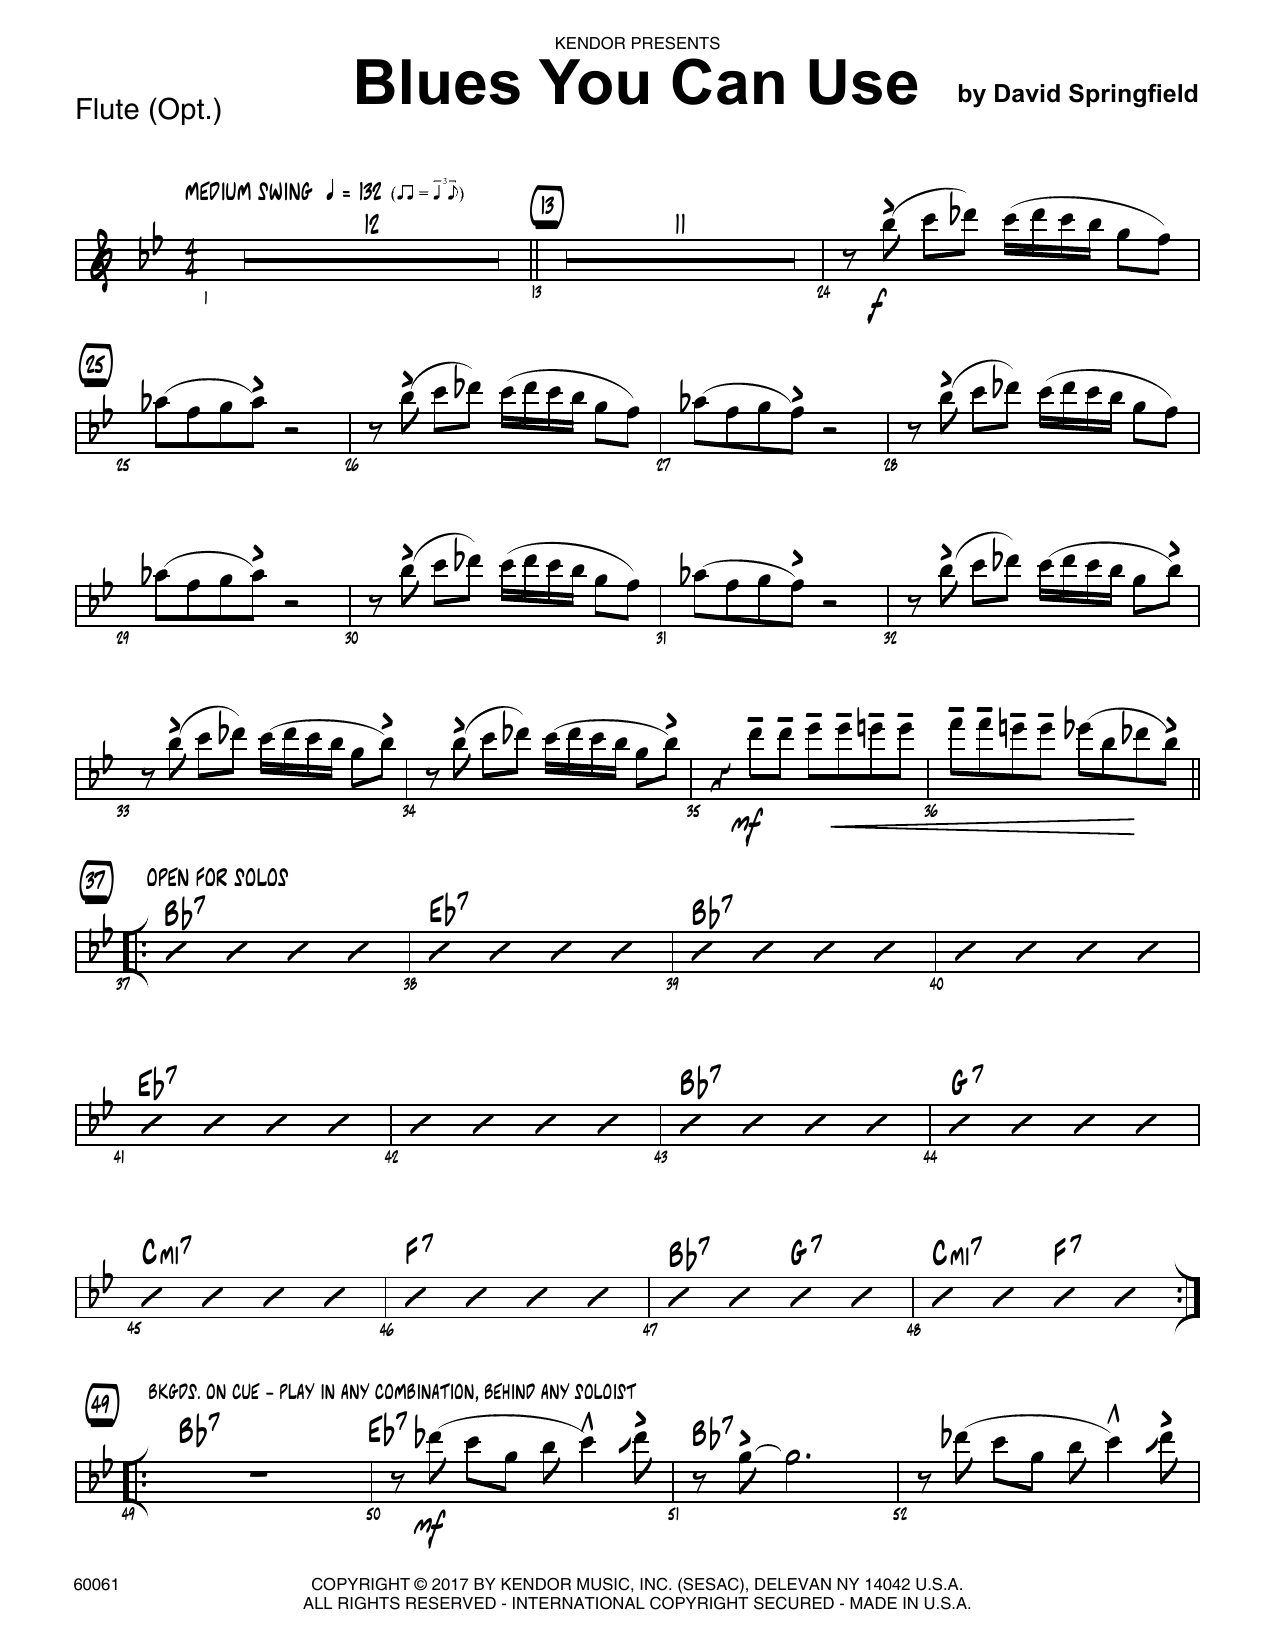 Download David Springfield Blues You Can Use - Flute Sheet Music